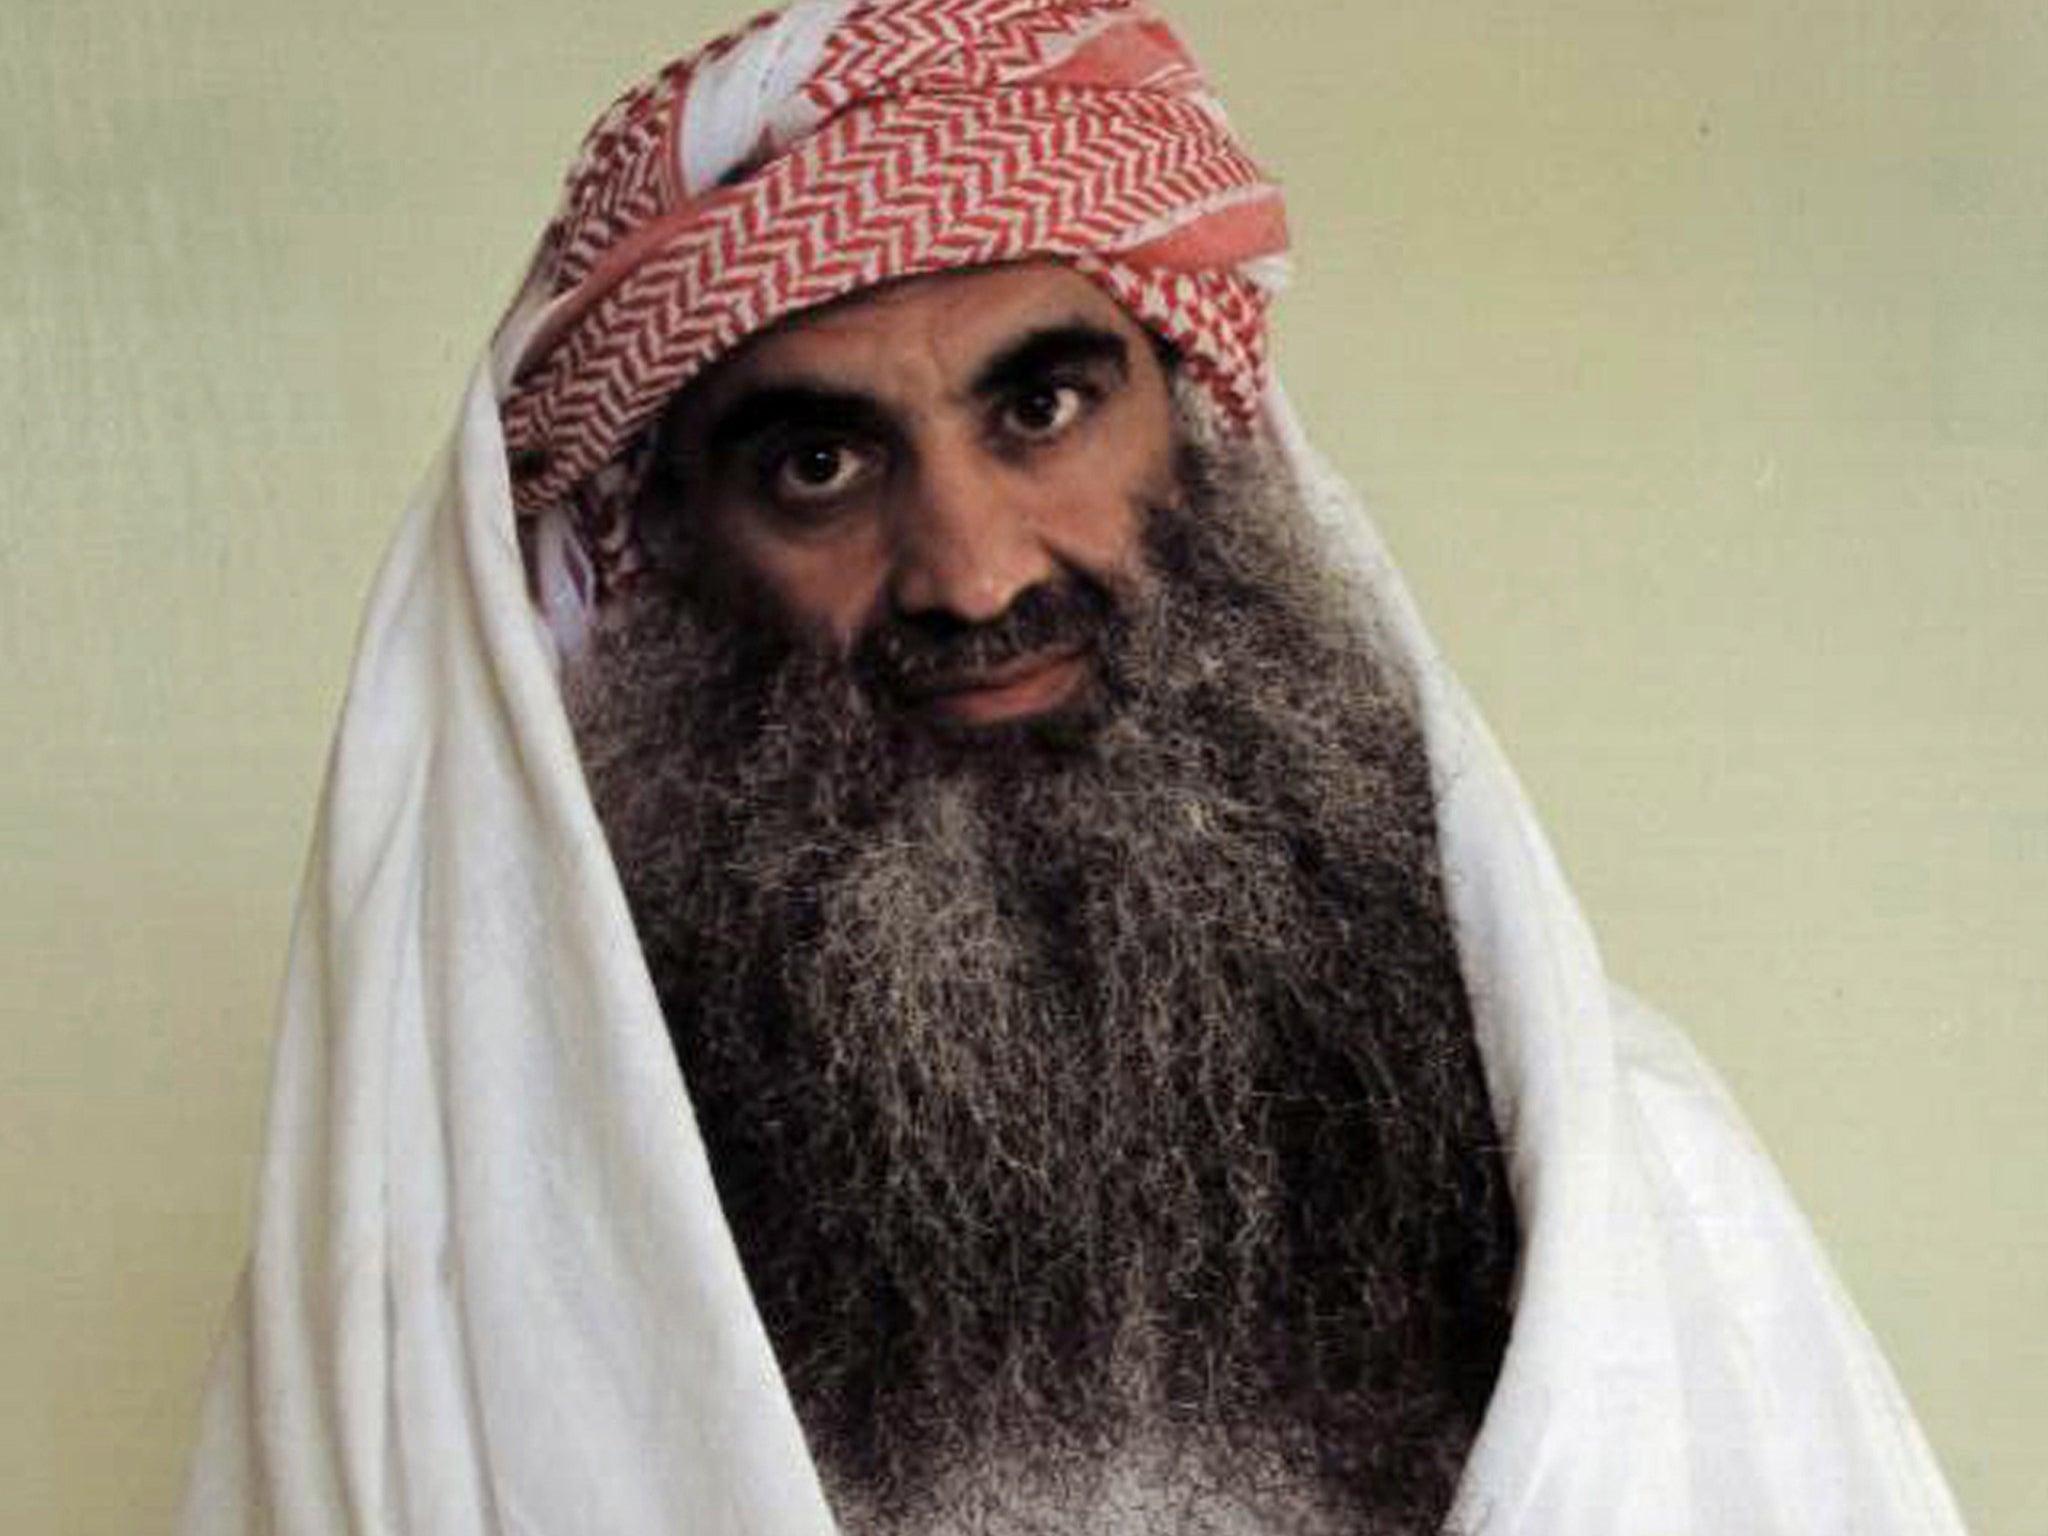 Khalid Sheikh Mohammed was waterboarded 183 times and confessed to planning 9/11